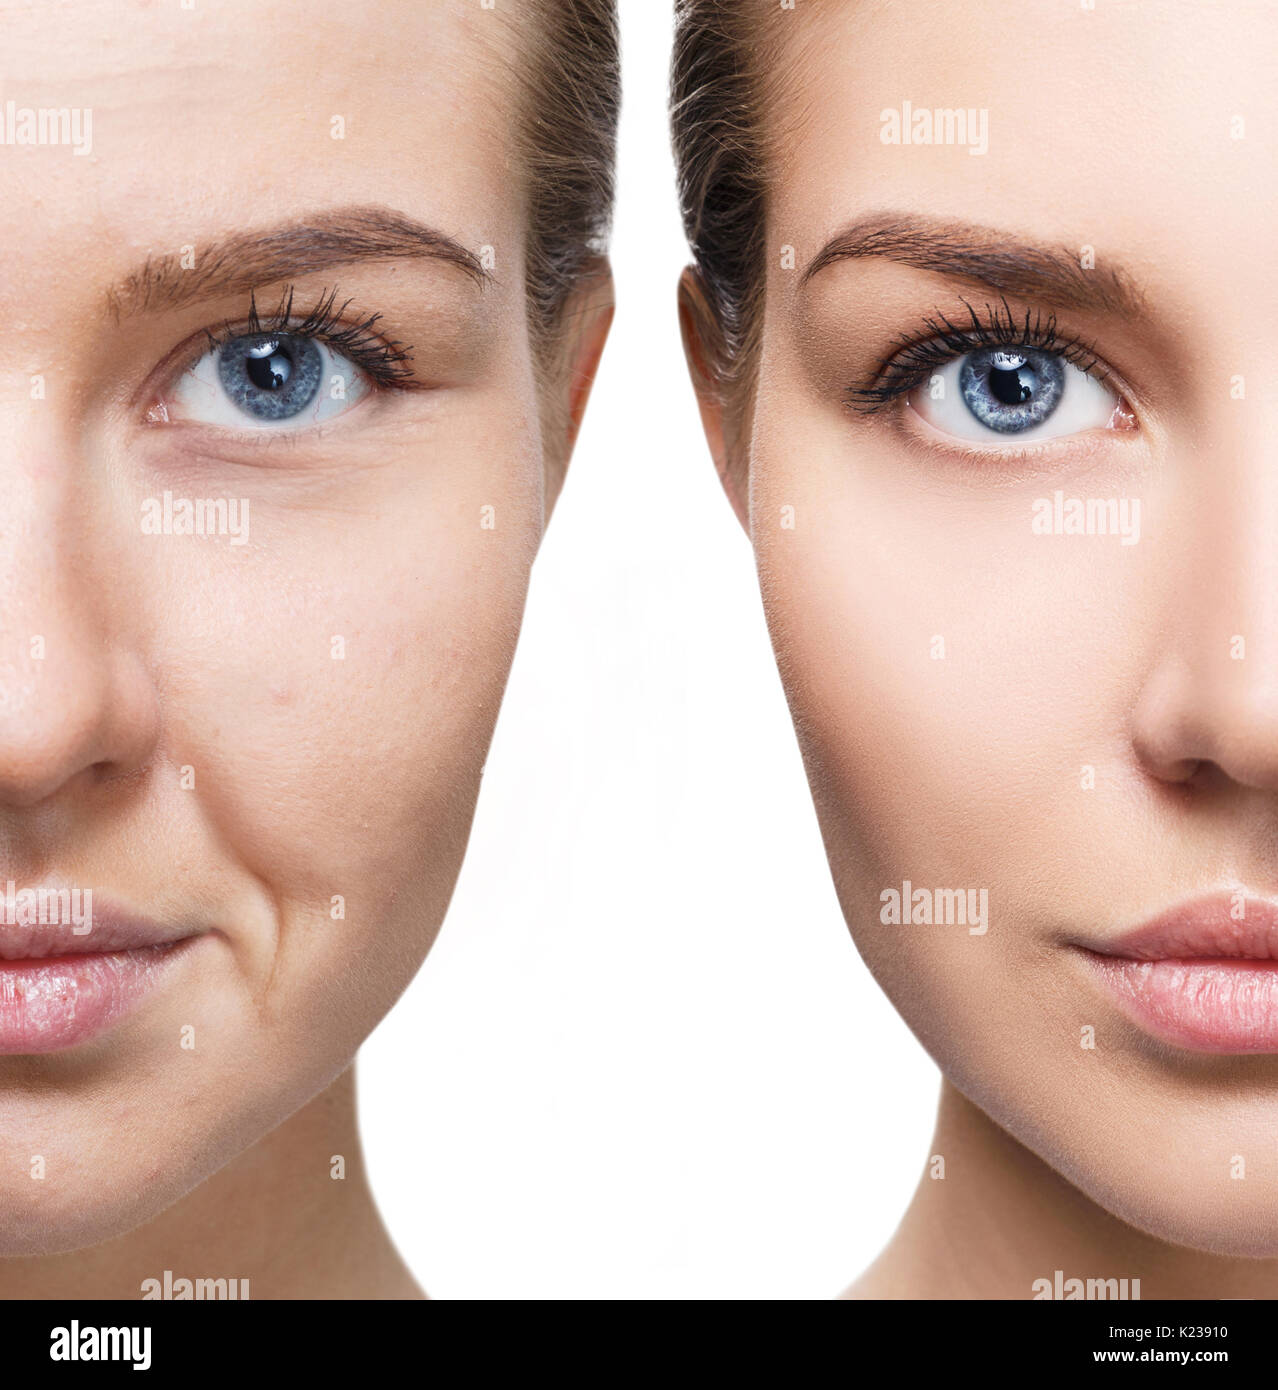 Woman's face before and after rejuvenation. Stock Photo